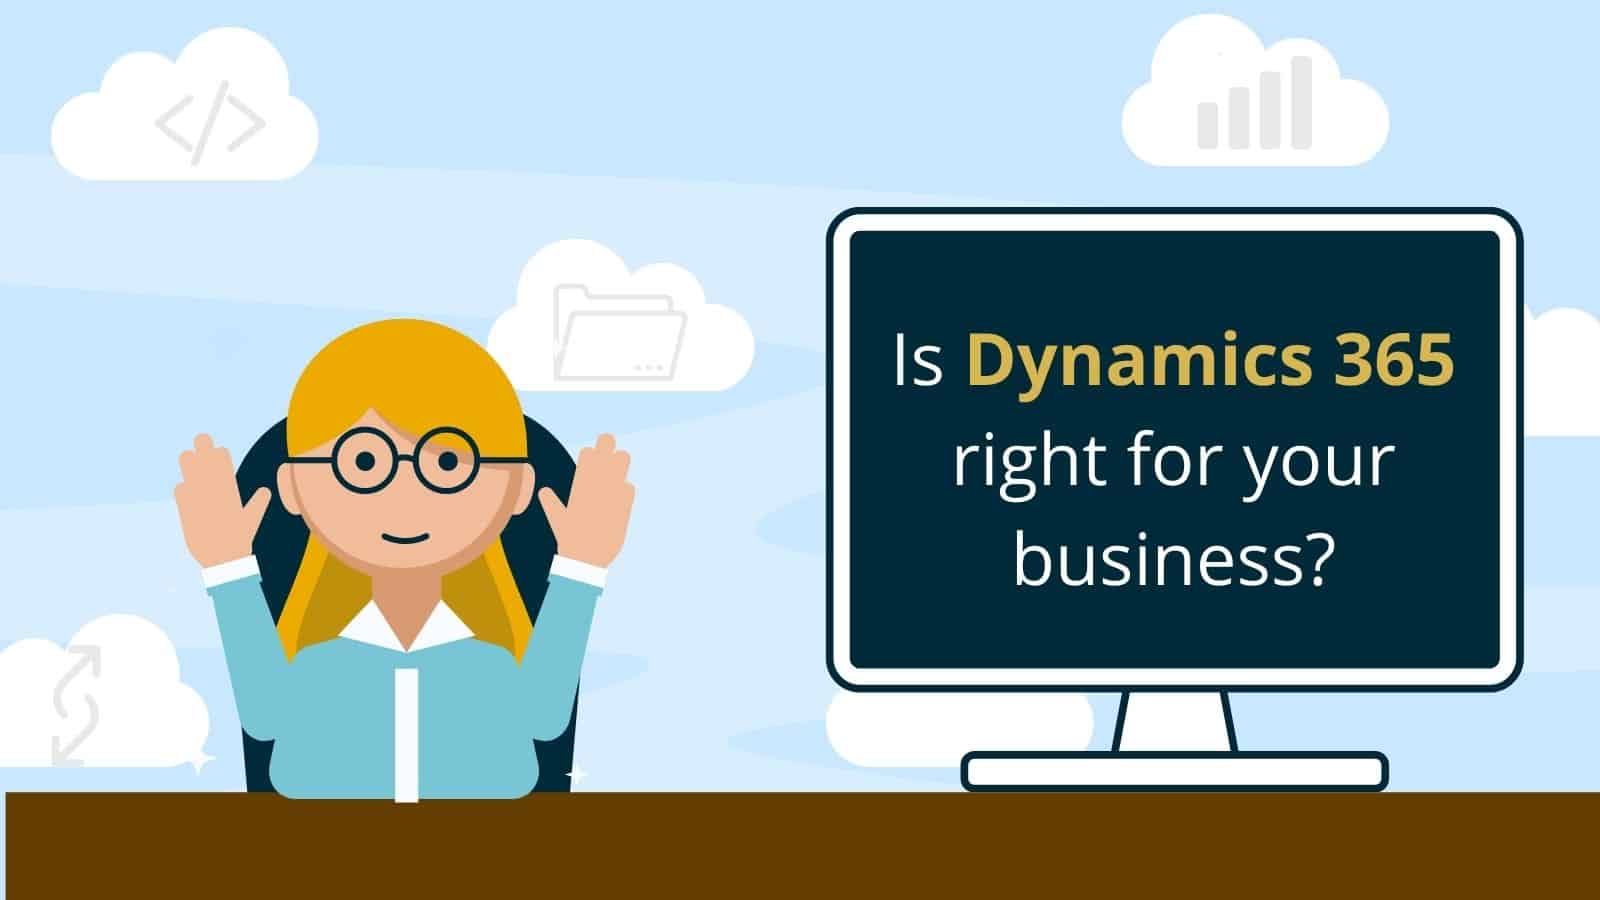 Female employee sat next to monio showing text 'is Dynamics 365 right for your business?'